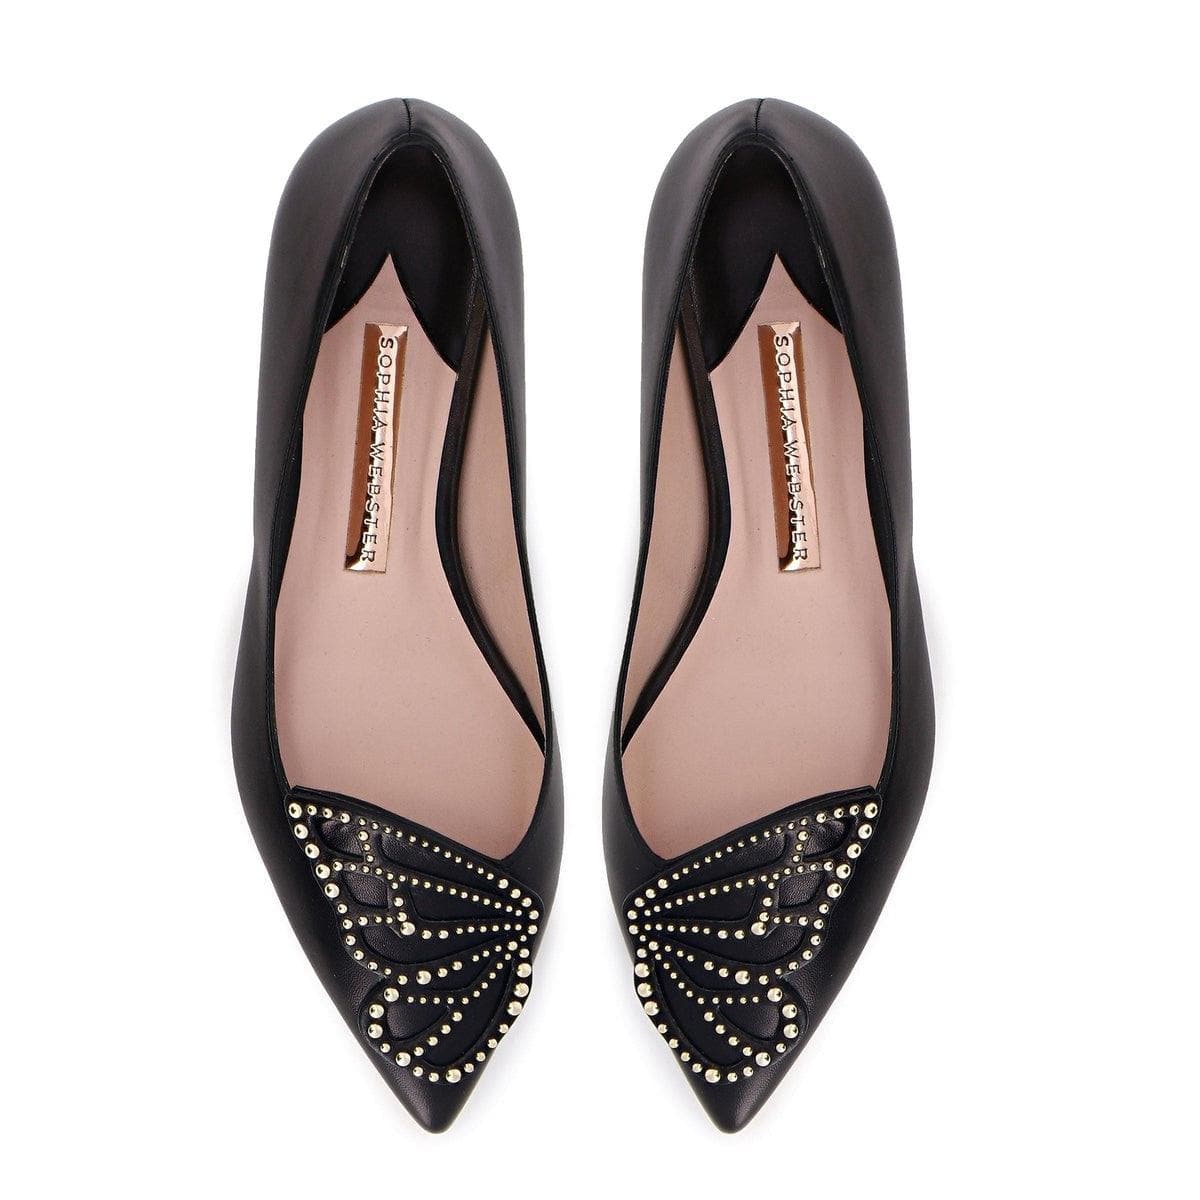 SOPHIA WEBSTER - Butterfly flat - Vittorio Citro Boutique